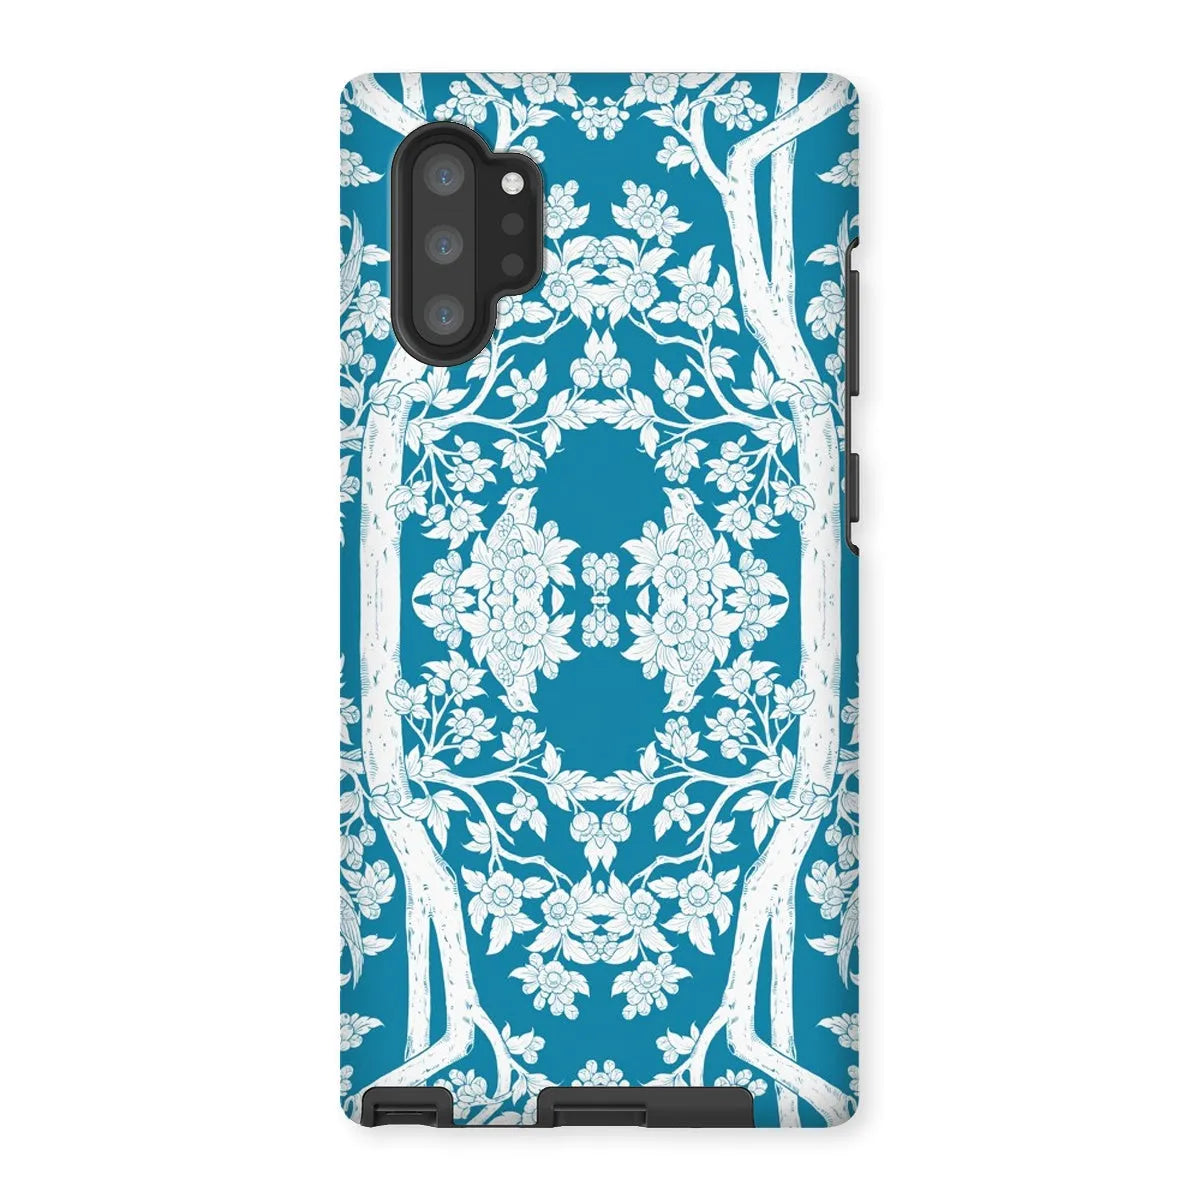 Aviary Blue Aesthetic Pattern Art Phone Case - Samsung Galaxy Note 10p / Matte - Mobile Phone Cases - Aesthetic Art